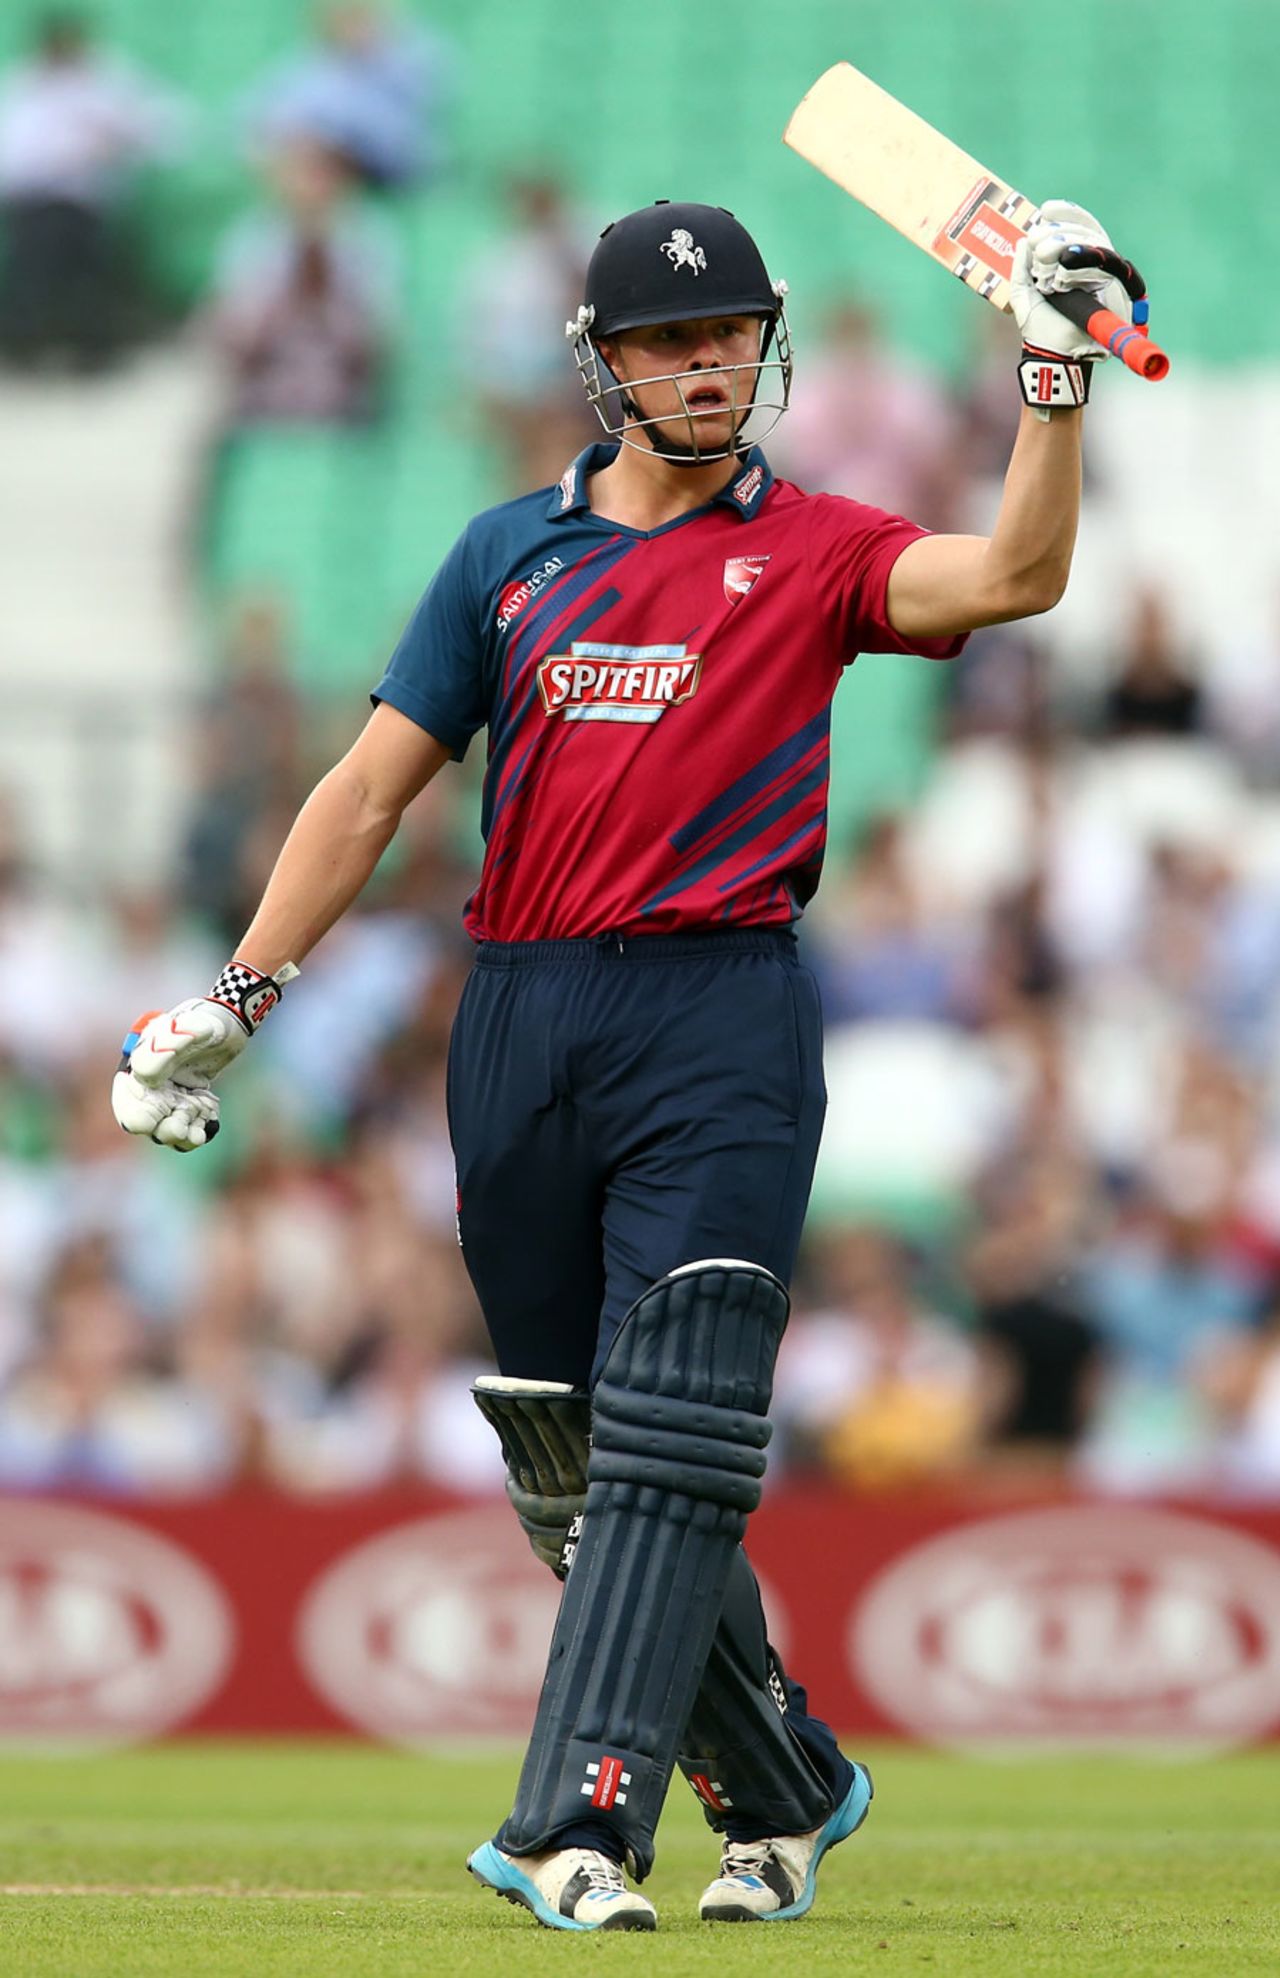 Fabian Cowdrey made fifty opening the batting, Surrey v Kent, NatWest T20 Blast, South Division, The Oval, July 2, 2014